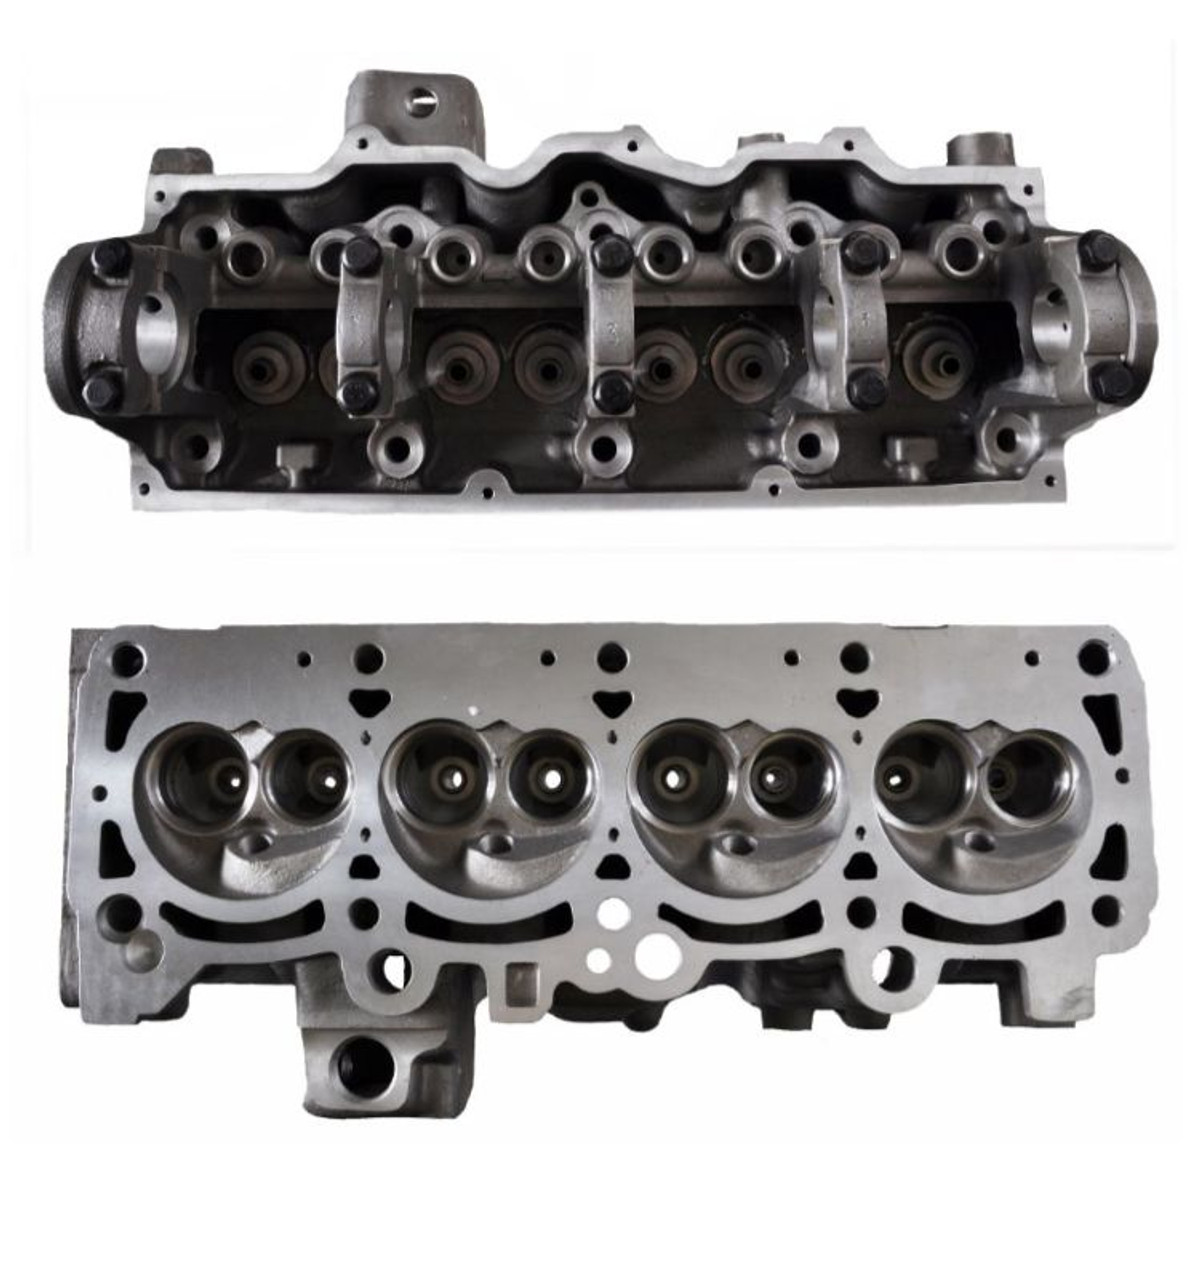 1987 Plymouth Reliant 2.2L Engine Cylinder Head EHCR135-1 -51